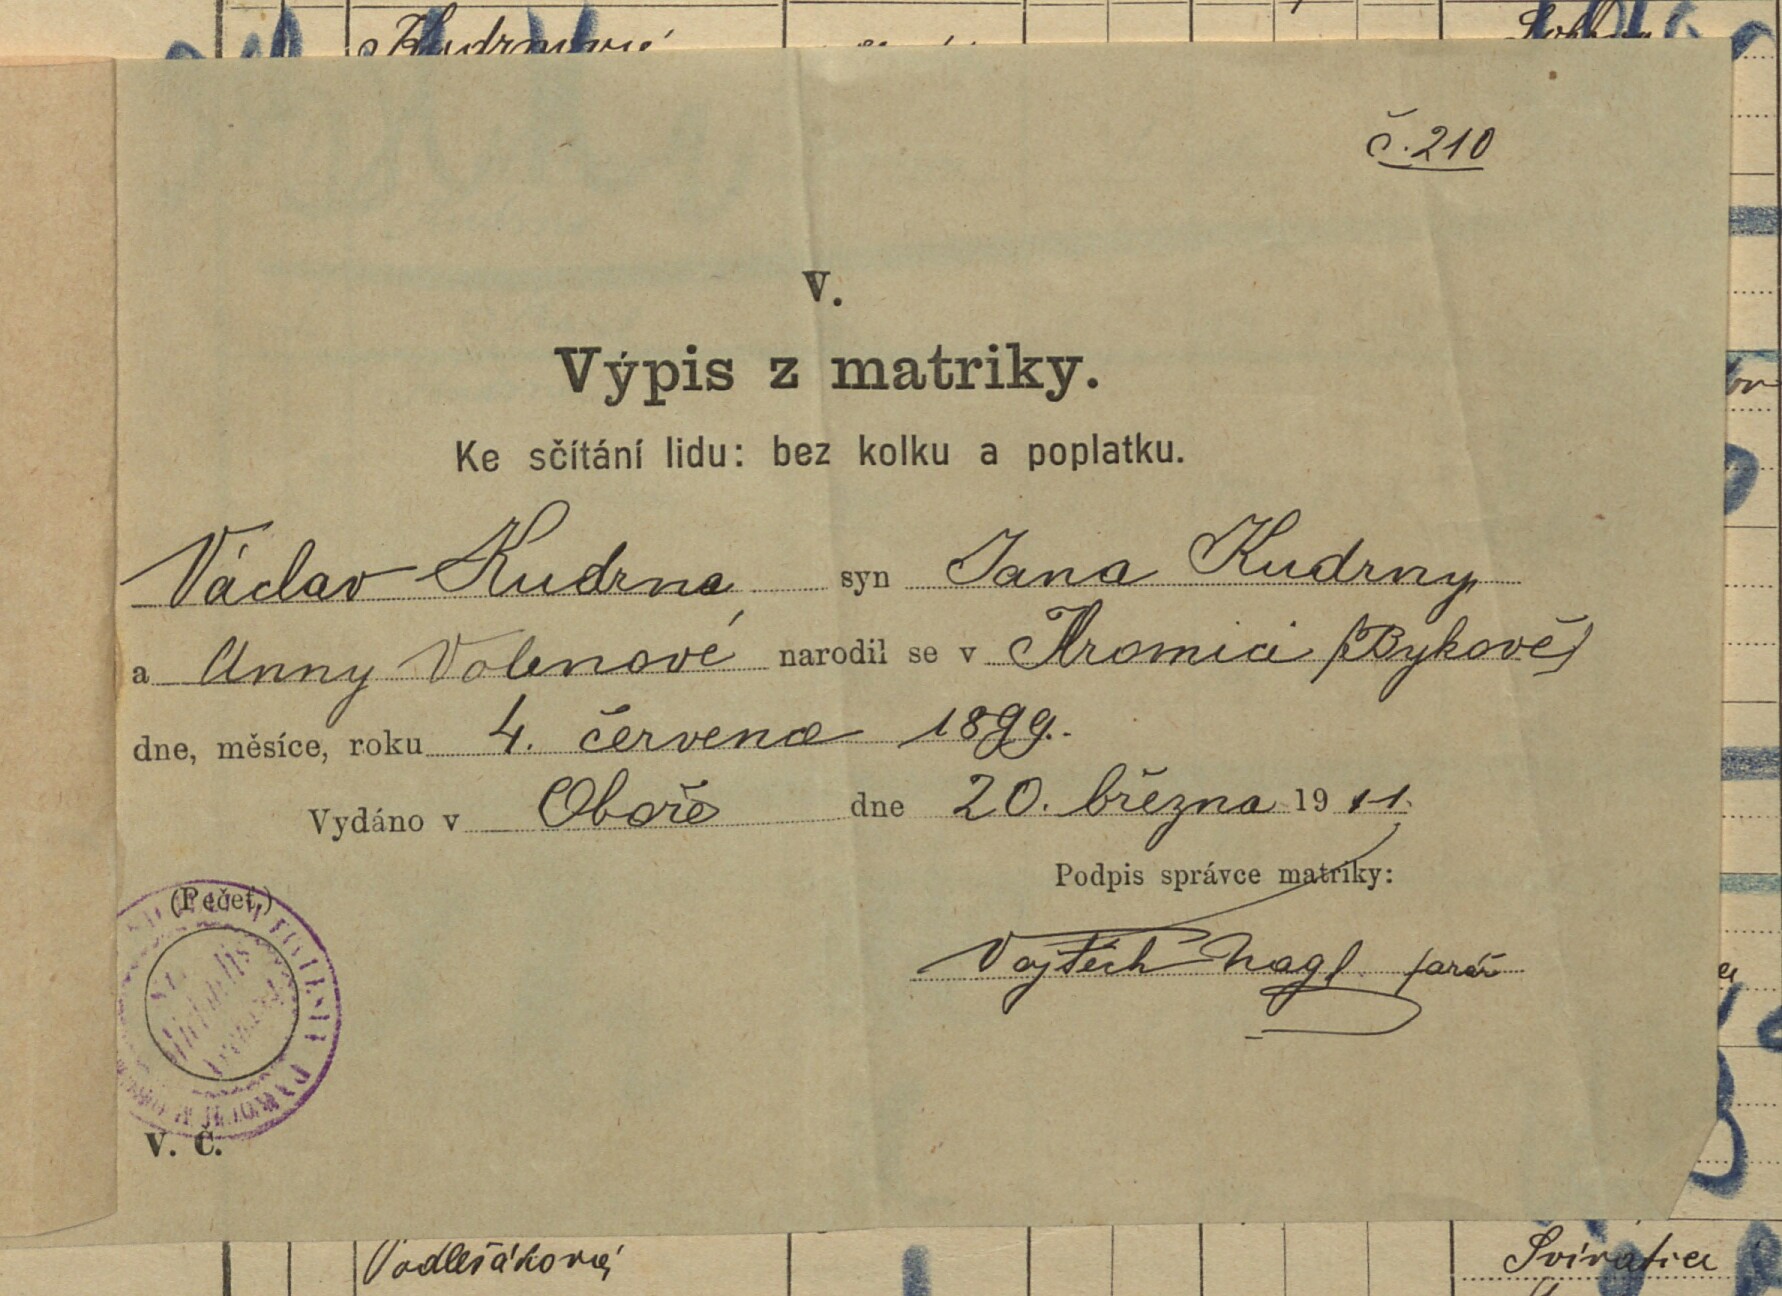 32. soap-kt_01159_census-1910-nalzovy-cp001_0320